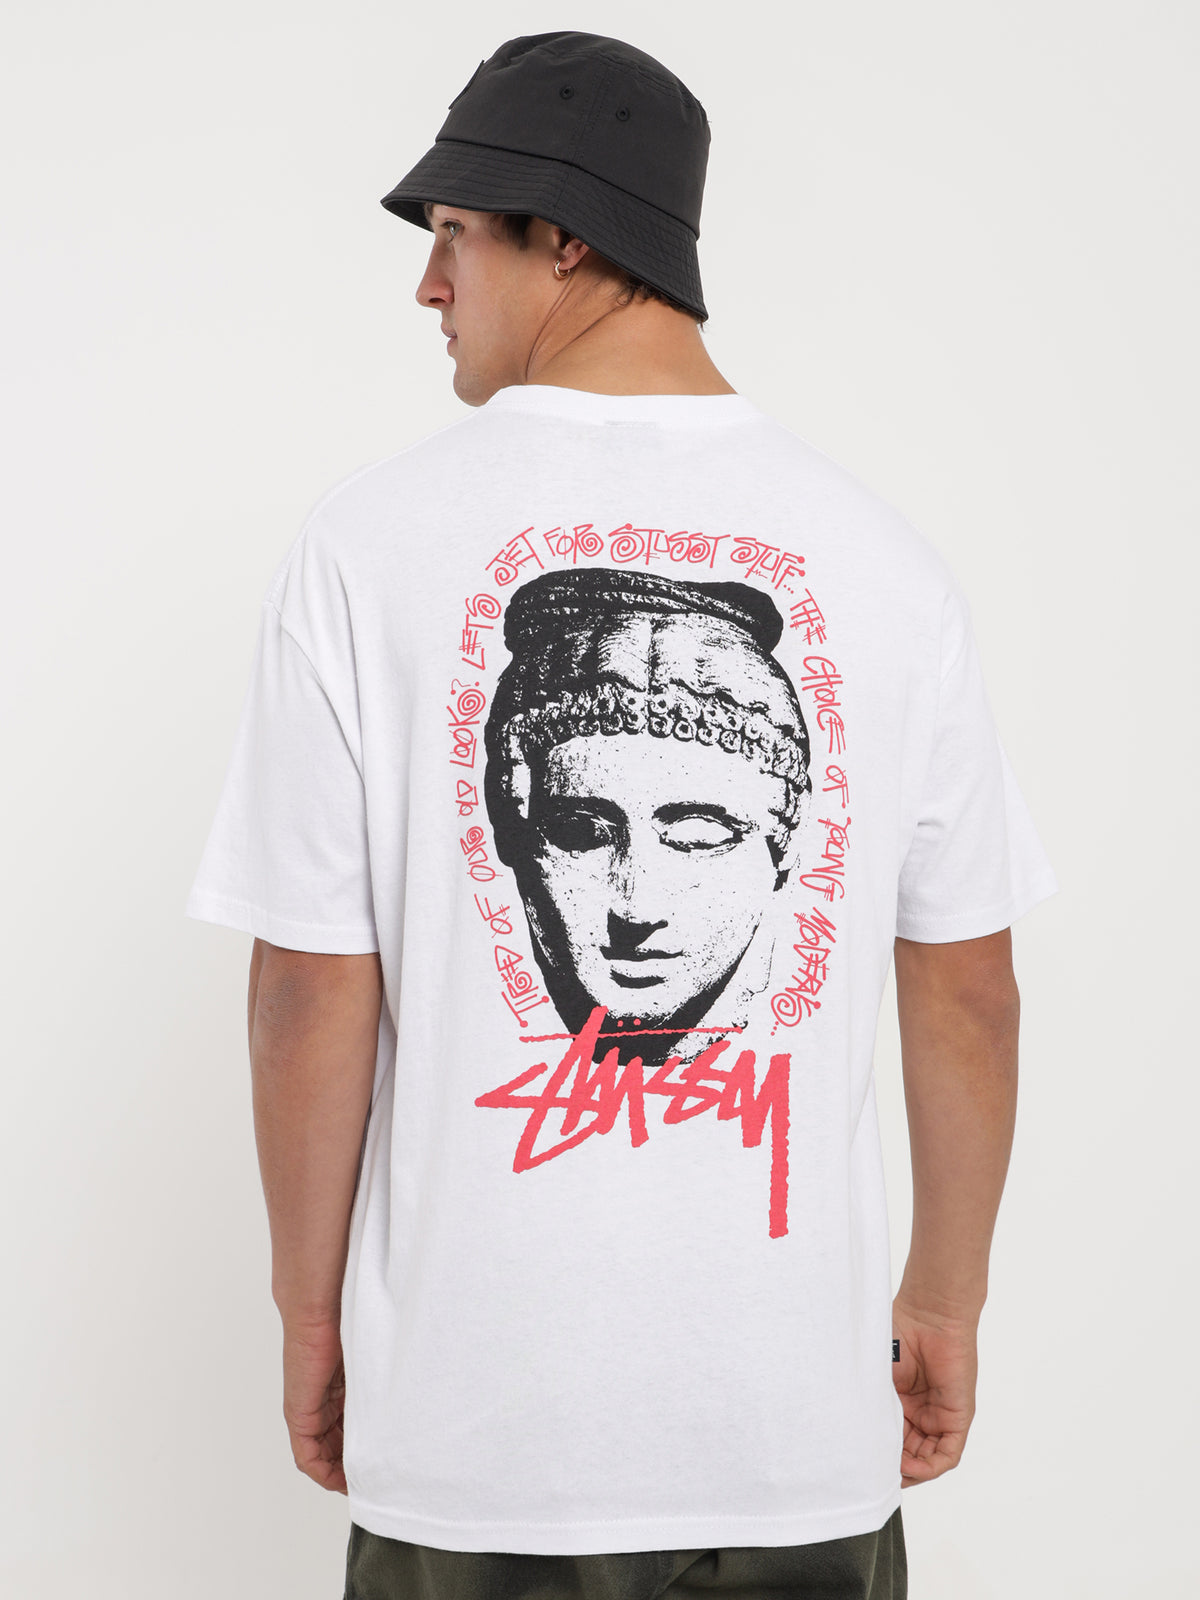 Young Moderns SS T-Shirt in White